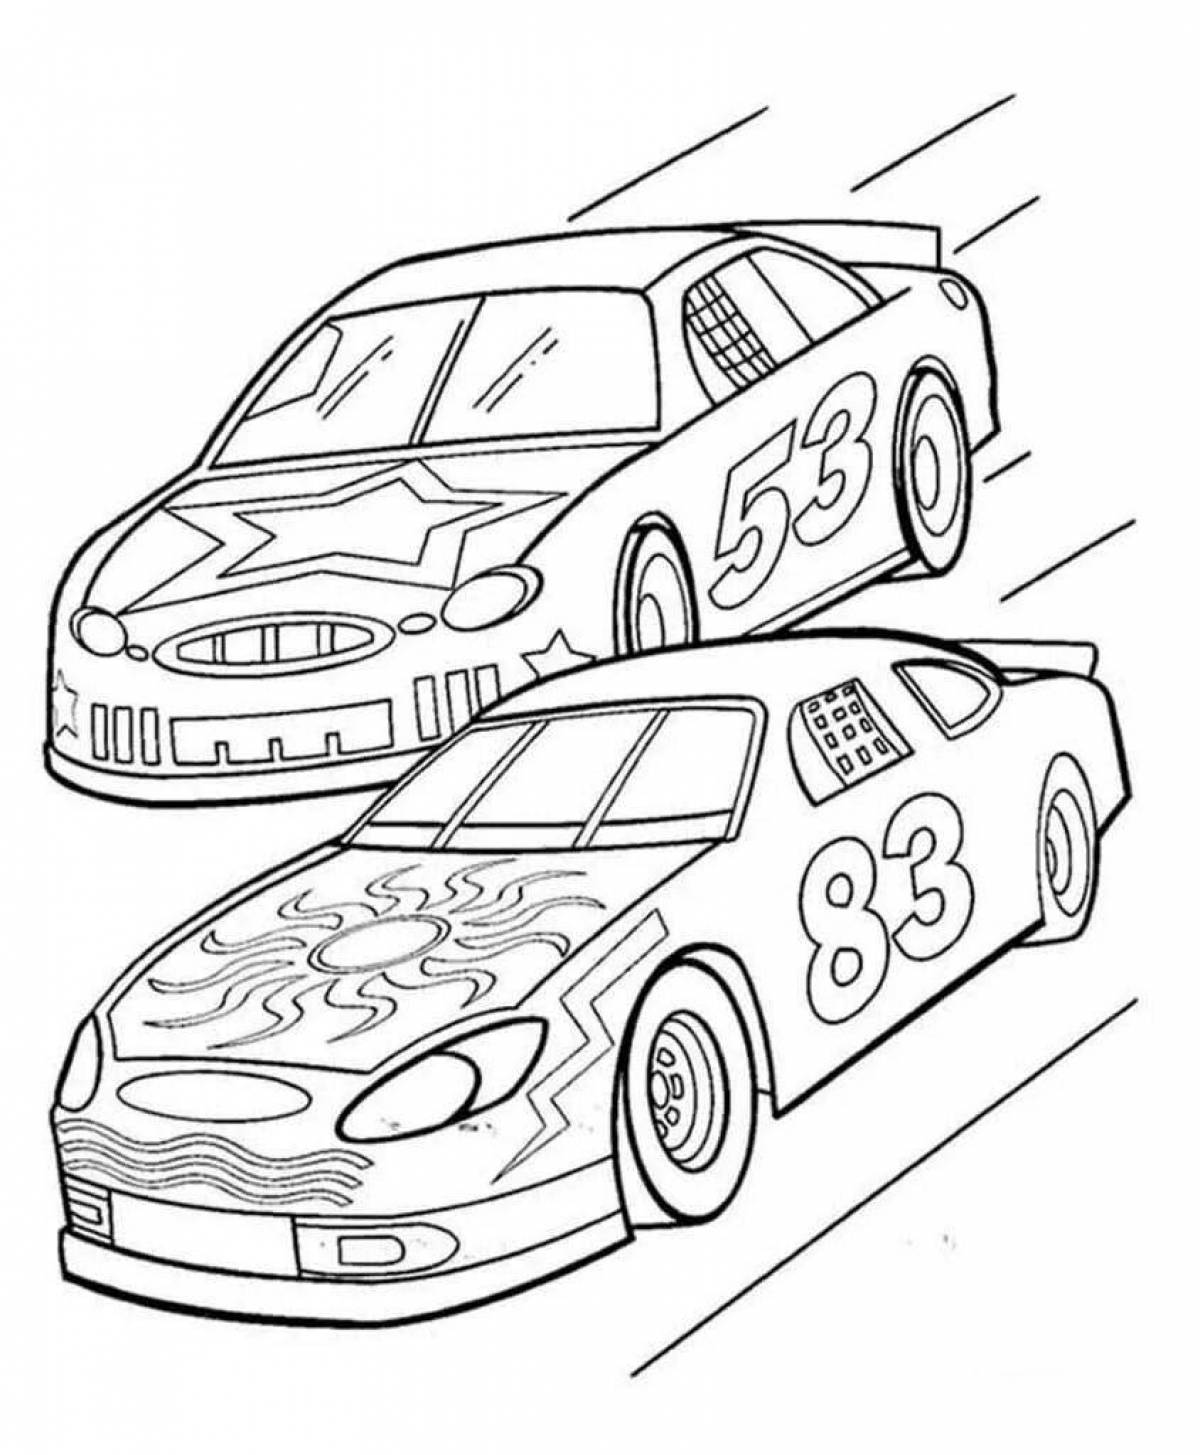 Coloring for racing car with intricate colors